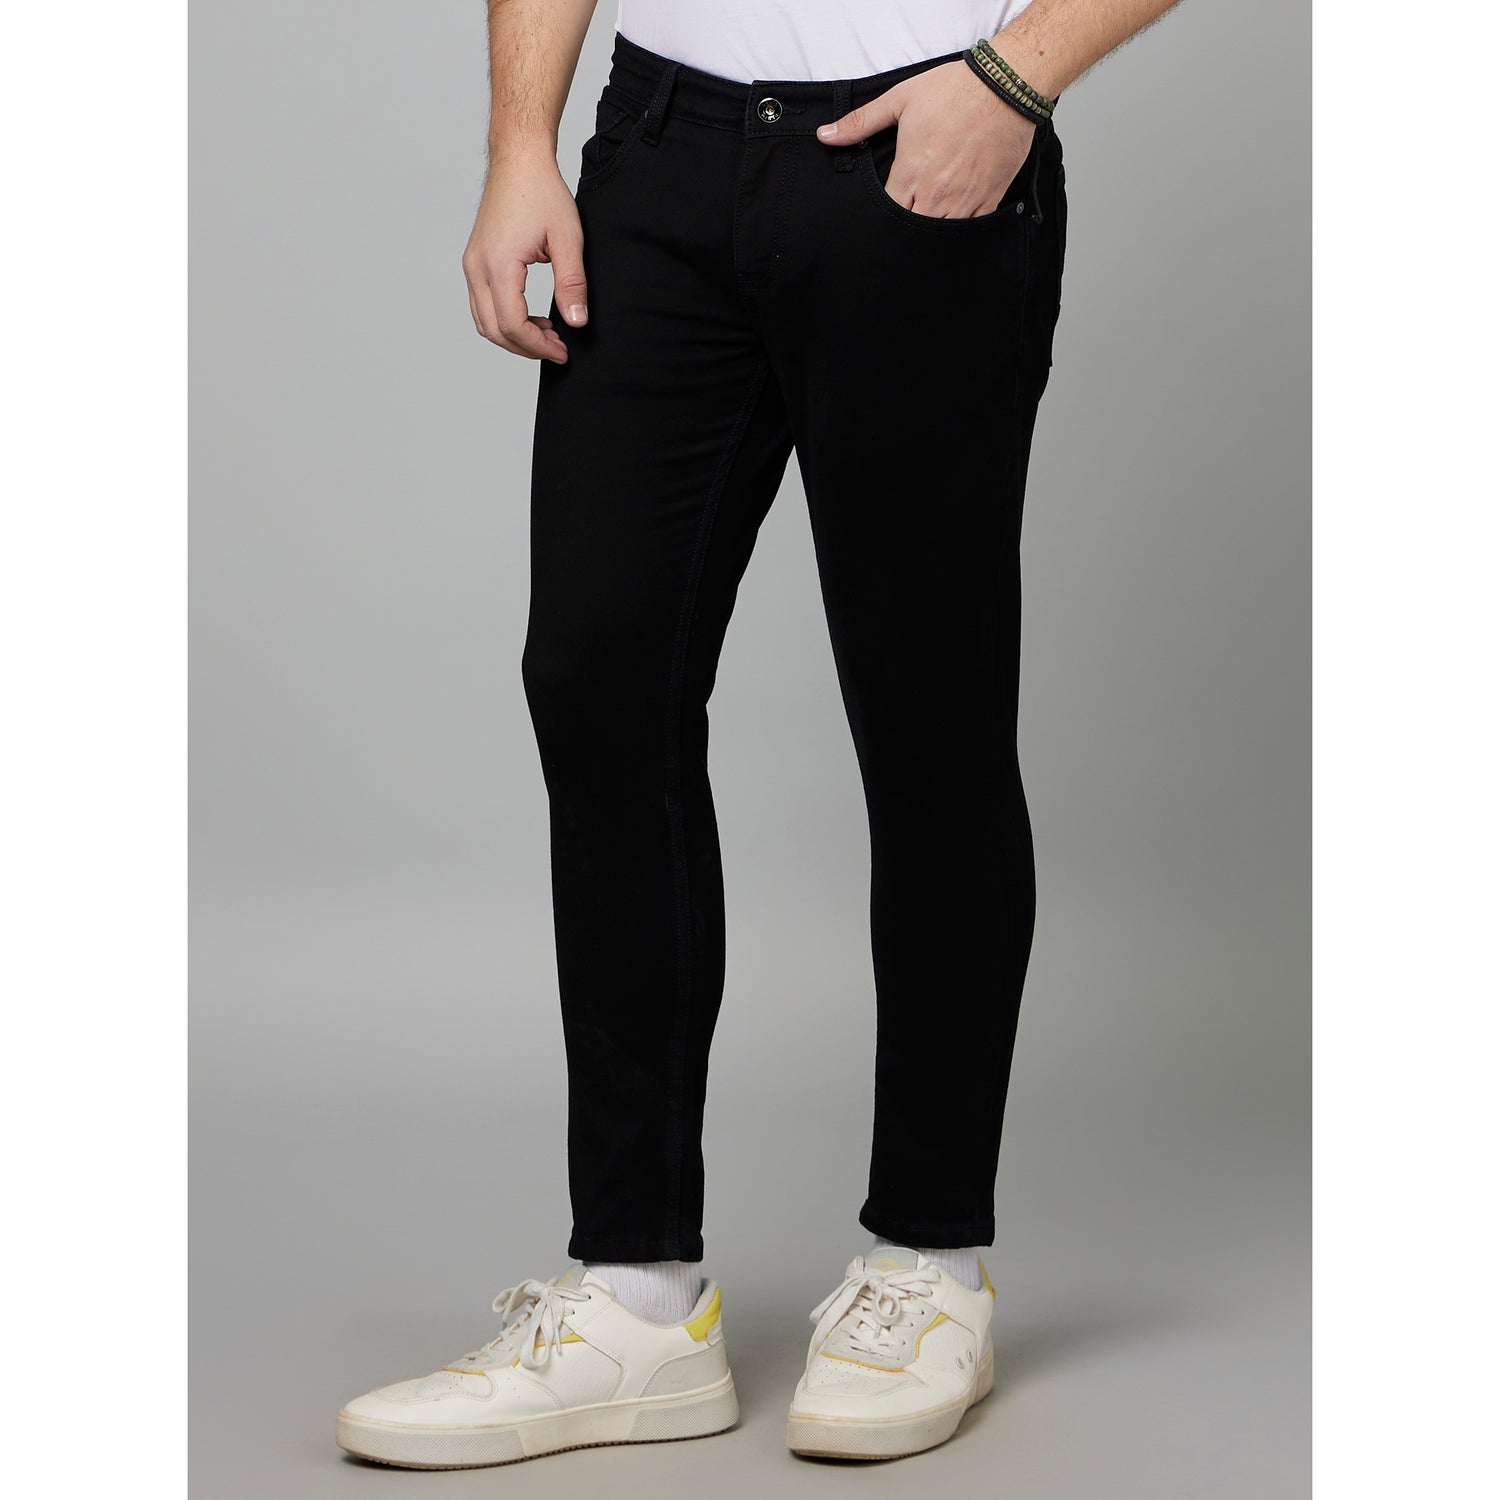 Navy Blue Classic Skinny Fit Trousers (FOANKLE2)